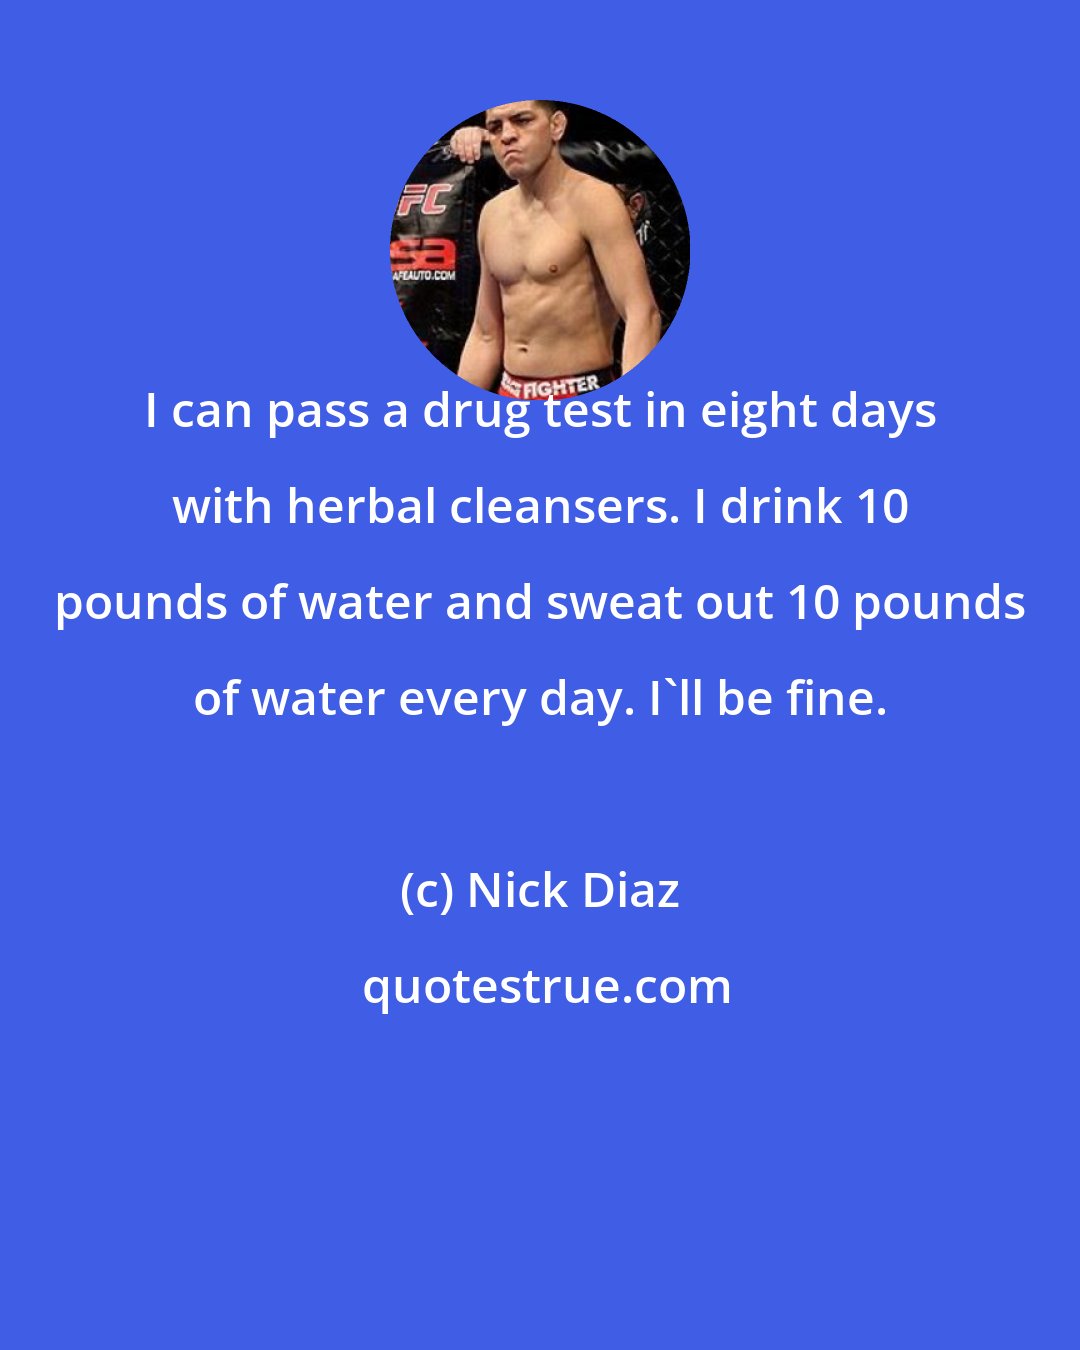 Nick Diaz: I can pass a drug test in eight days with herbal cleansers. I drink 10 pounds of water and sweat out 10 pounds of water every day. I'll be fine.